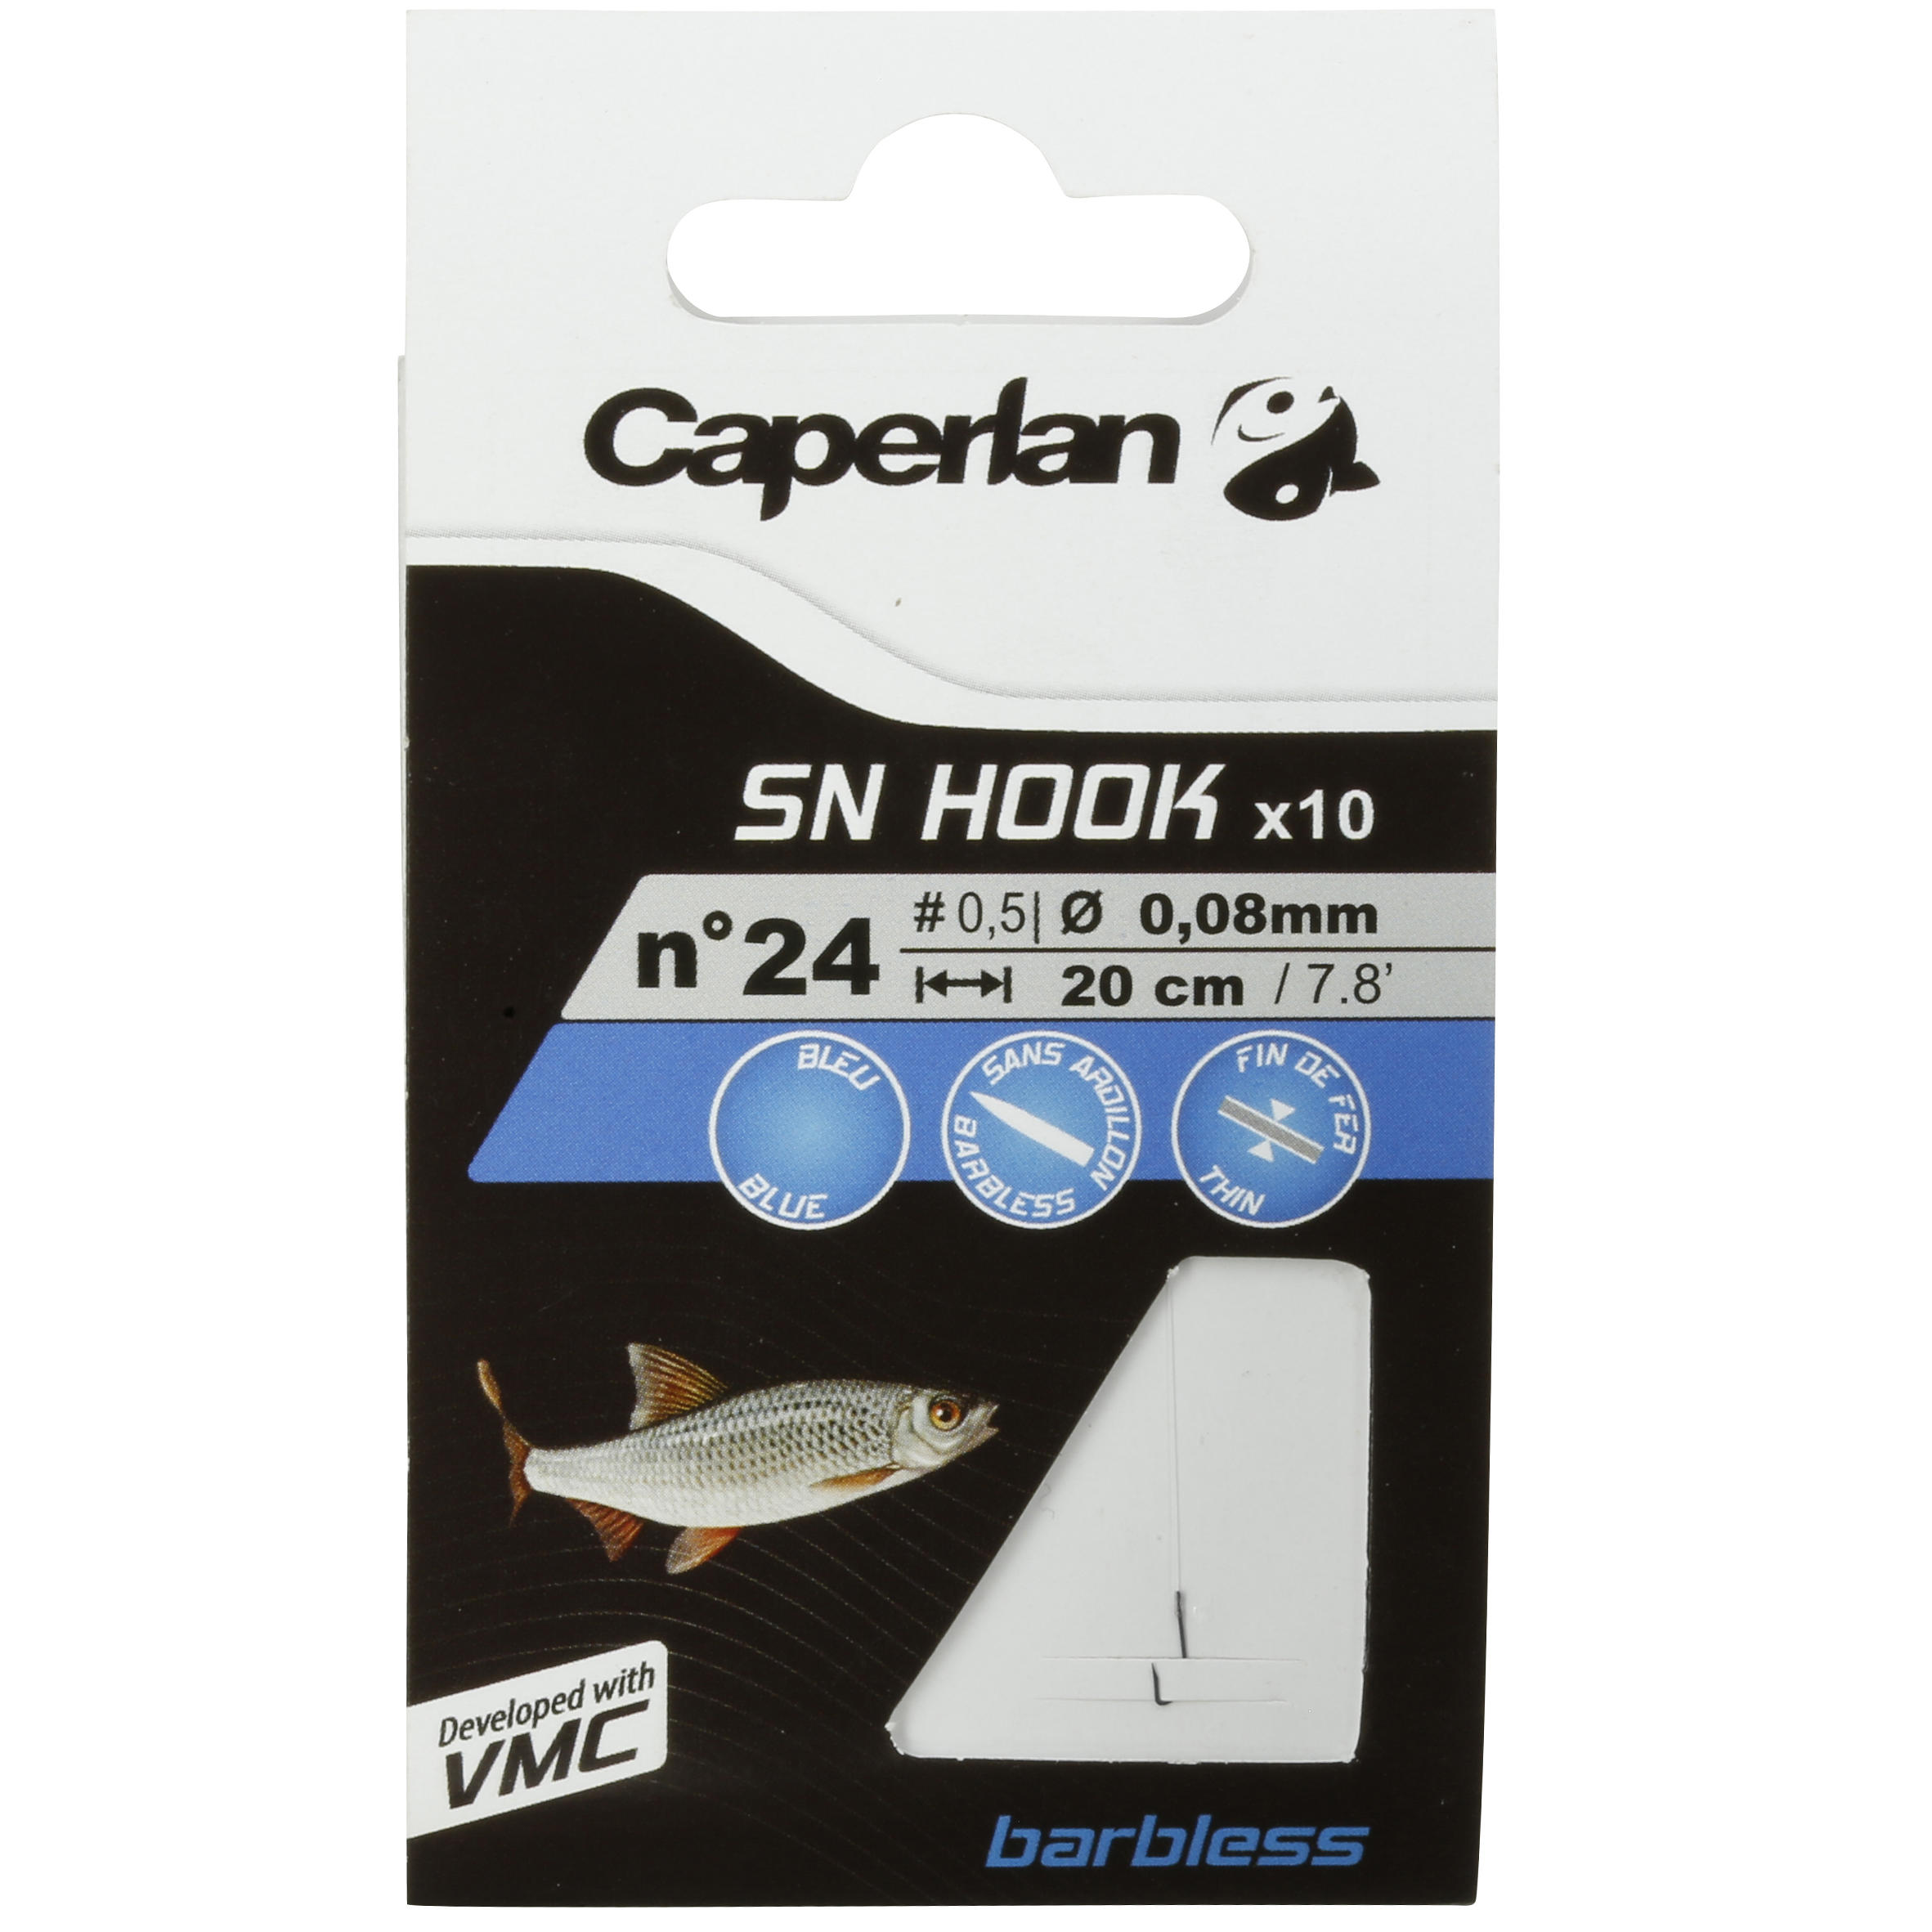 SN Hook Barbless Fishing Rigged Hooks 12/14